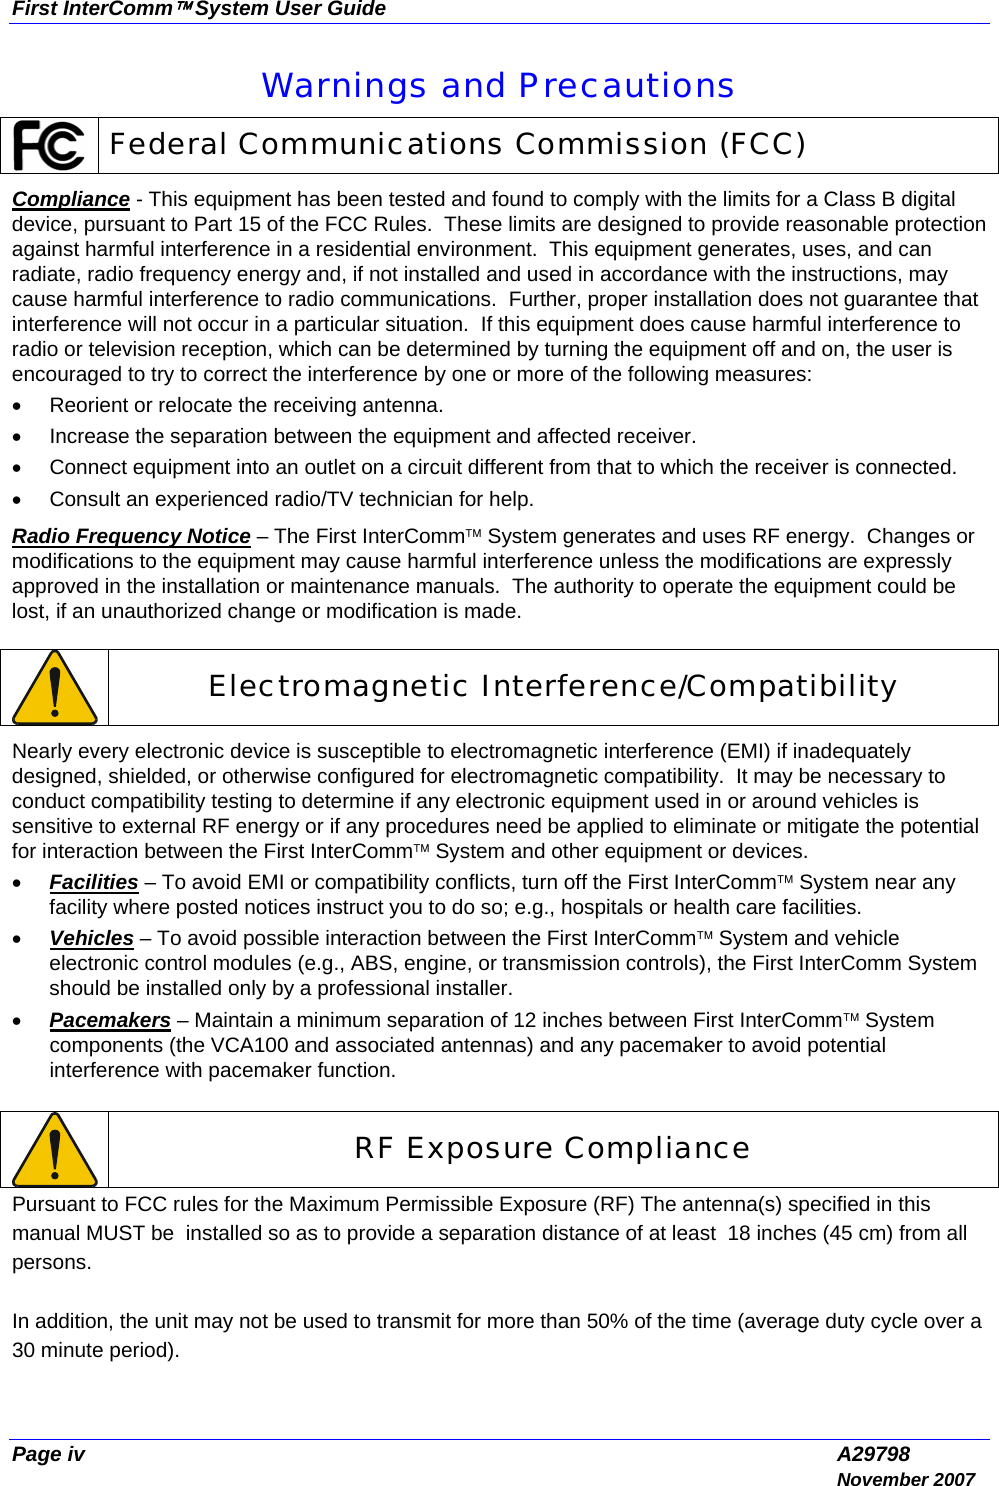 First InterComm™ System User Guide Page iv  A29798  November 2007 Warnings and Precautions  Federal Communications Commission (FCC) Compliance - This equipment has been tested and found to comply with the limits for a Class B digital device, pursuant to Part 15 of the FCC Rules.  These limits are designed to provide reasonable protection against harmful interference in a residential environment.  This equipment generates, uses, and can radiate, radio frequency energy and, if not installed and used in accordance with the instructions, may cause harmful interference to radio communications.  Further, proper installation does not guarantee that interference will not occur in a particular situation.  If this equipment does cause harmful interference to radio or television reception, which can be determined by turning the equipment off and on, the user is encouraged to try to correct the interference by one or more of the following measures: •  Reorient or relocate the receiving antenna. •  Increase the separation between the equipment and affected receiver. •  Connect equipment into an outlet on a circuit different from that to which the receiver is connected. •  Consult an experienced radio/TV technician for help. Radio Frequency Notice – The First InterComm™ System generates and uses RF energy.  Changes or modifications to the equipment may cause harmful interference unless the modifications are expressly approved in the installation or maintenance manuals.  The authority to operate the equipment could be lost, if an unauthorized change or modification is made.   Electromagnetic Interference/Compatibility Nearly every electronic device is susceptible to electromagnetic interference (EMI) if inadequately designed, shielded, or otherwise configured for electromagnetic compatibility.  It may be necessary to conduct compatibility testing to determine if any electronic equipment used in or around vehicles is sensitive to external RF energy or if any procedures need be applied to eliminate or mitigate the potential for interaction between the First InterComm™ System and other equipment or devices. • Facilities – To avoid EMI or compatibility conflicts, turn off the First InterComm™ System near any facility where posted notices instruct you to do so; e.g., hospitals or health care facilities.  • Vehicles – To avoid possible interaction between the First InterComm™ System and vehicle electronic control modules (e.g., ABS, engine, or transmission controls), the First InterComm System should be installed only by a professional installer. • Pacemakers – Maintain a minimum separation of 12 inches between First InterComm™ System components (the VCA100 and associated antennas) and any pacemaker to avoid potential interference with pacemaker function.   RF Exposure Compliance Pursuant to FCC rules for the Maximum Permissible Exposure (RF) The antenna(s) specified in this manual MUST be  installed so as to provide a separation distance of at least  18 inches (45 cm) from all persons.  In addition, the unit may not be used to transmit for more than 50% of the time (average duty cycle over a 30 minute period).  